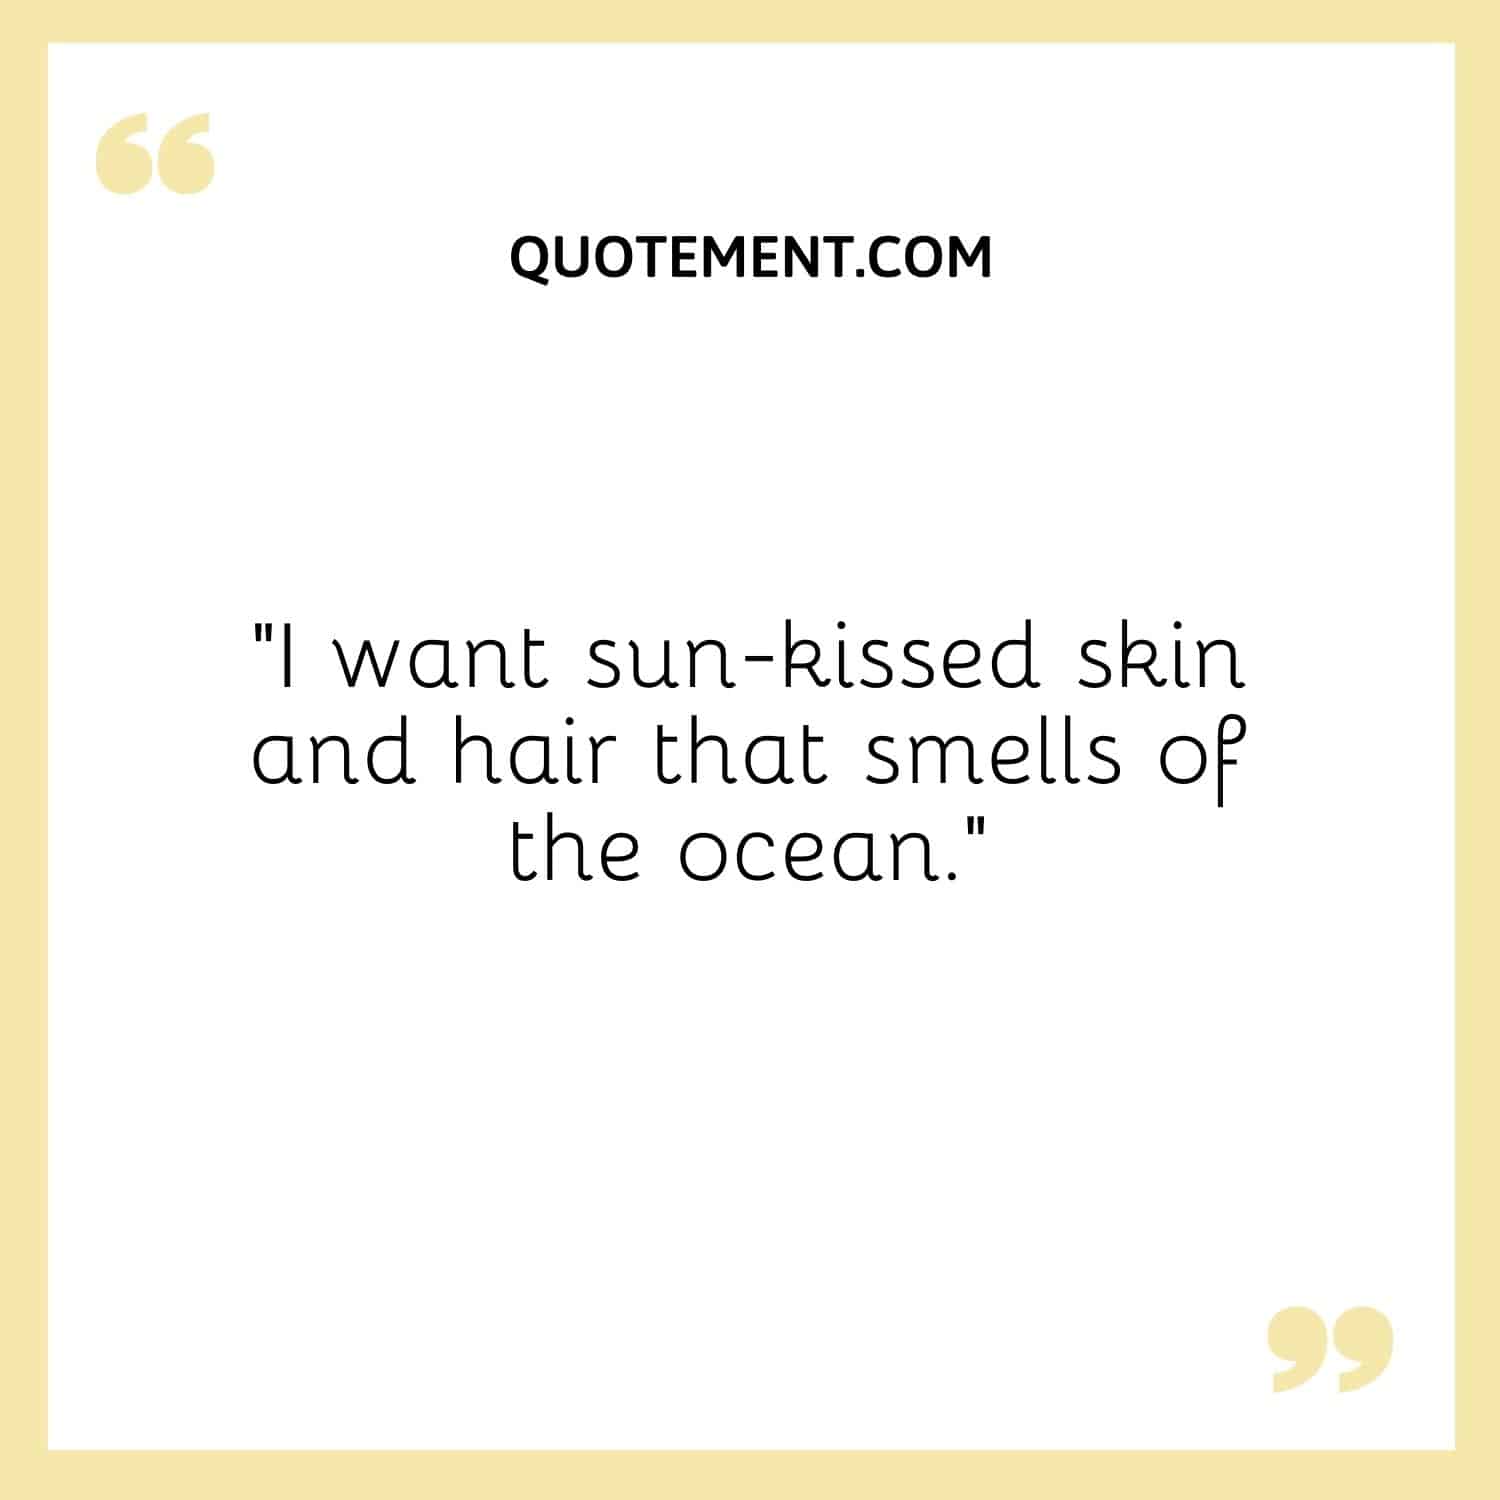 I want sun-kissed skin and hair that smells of the ocean